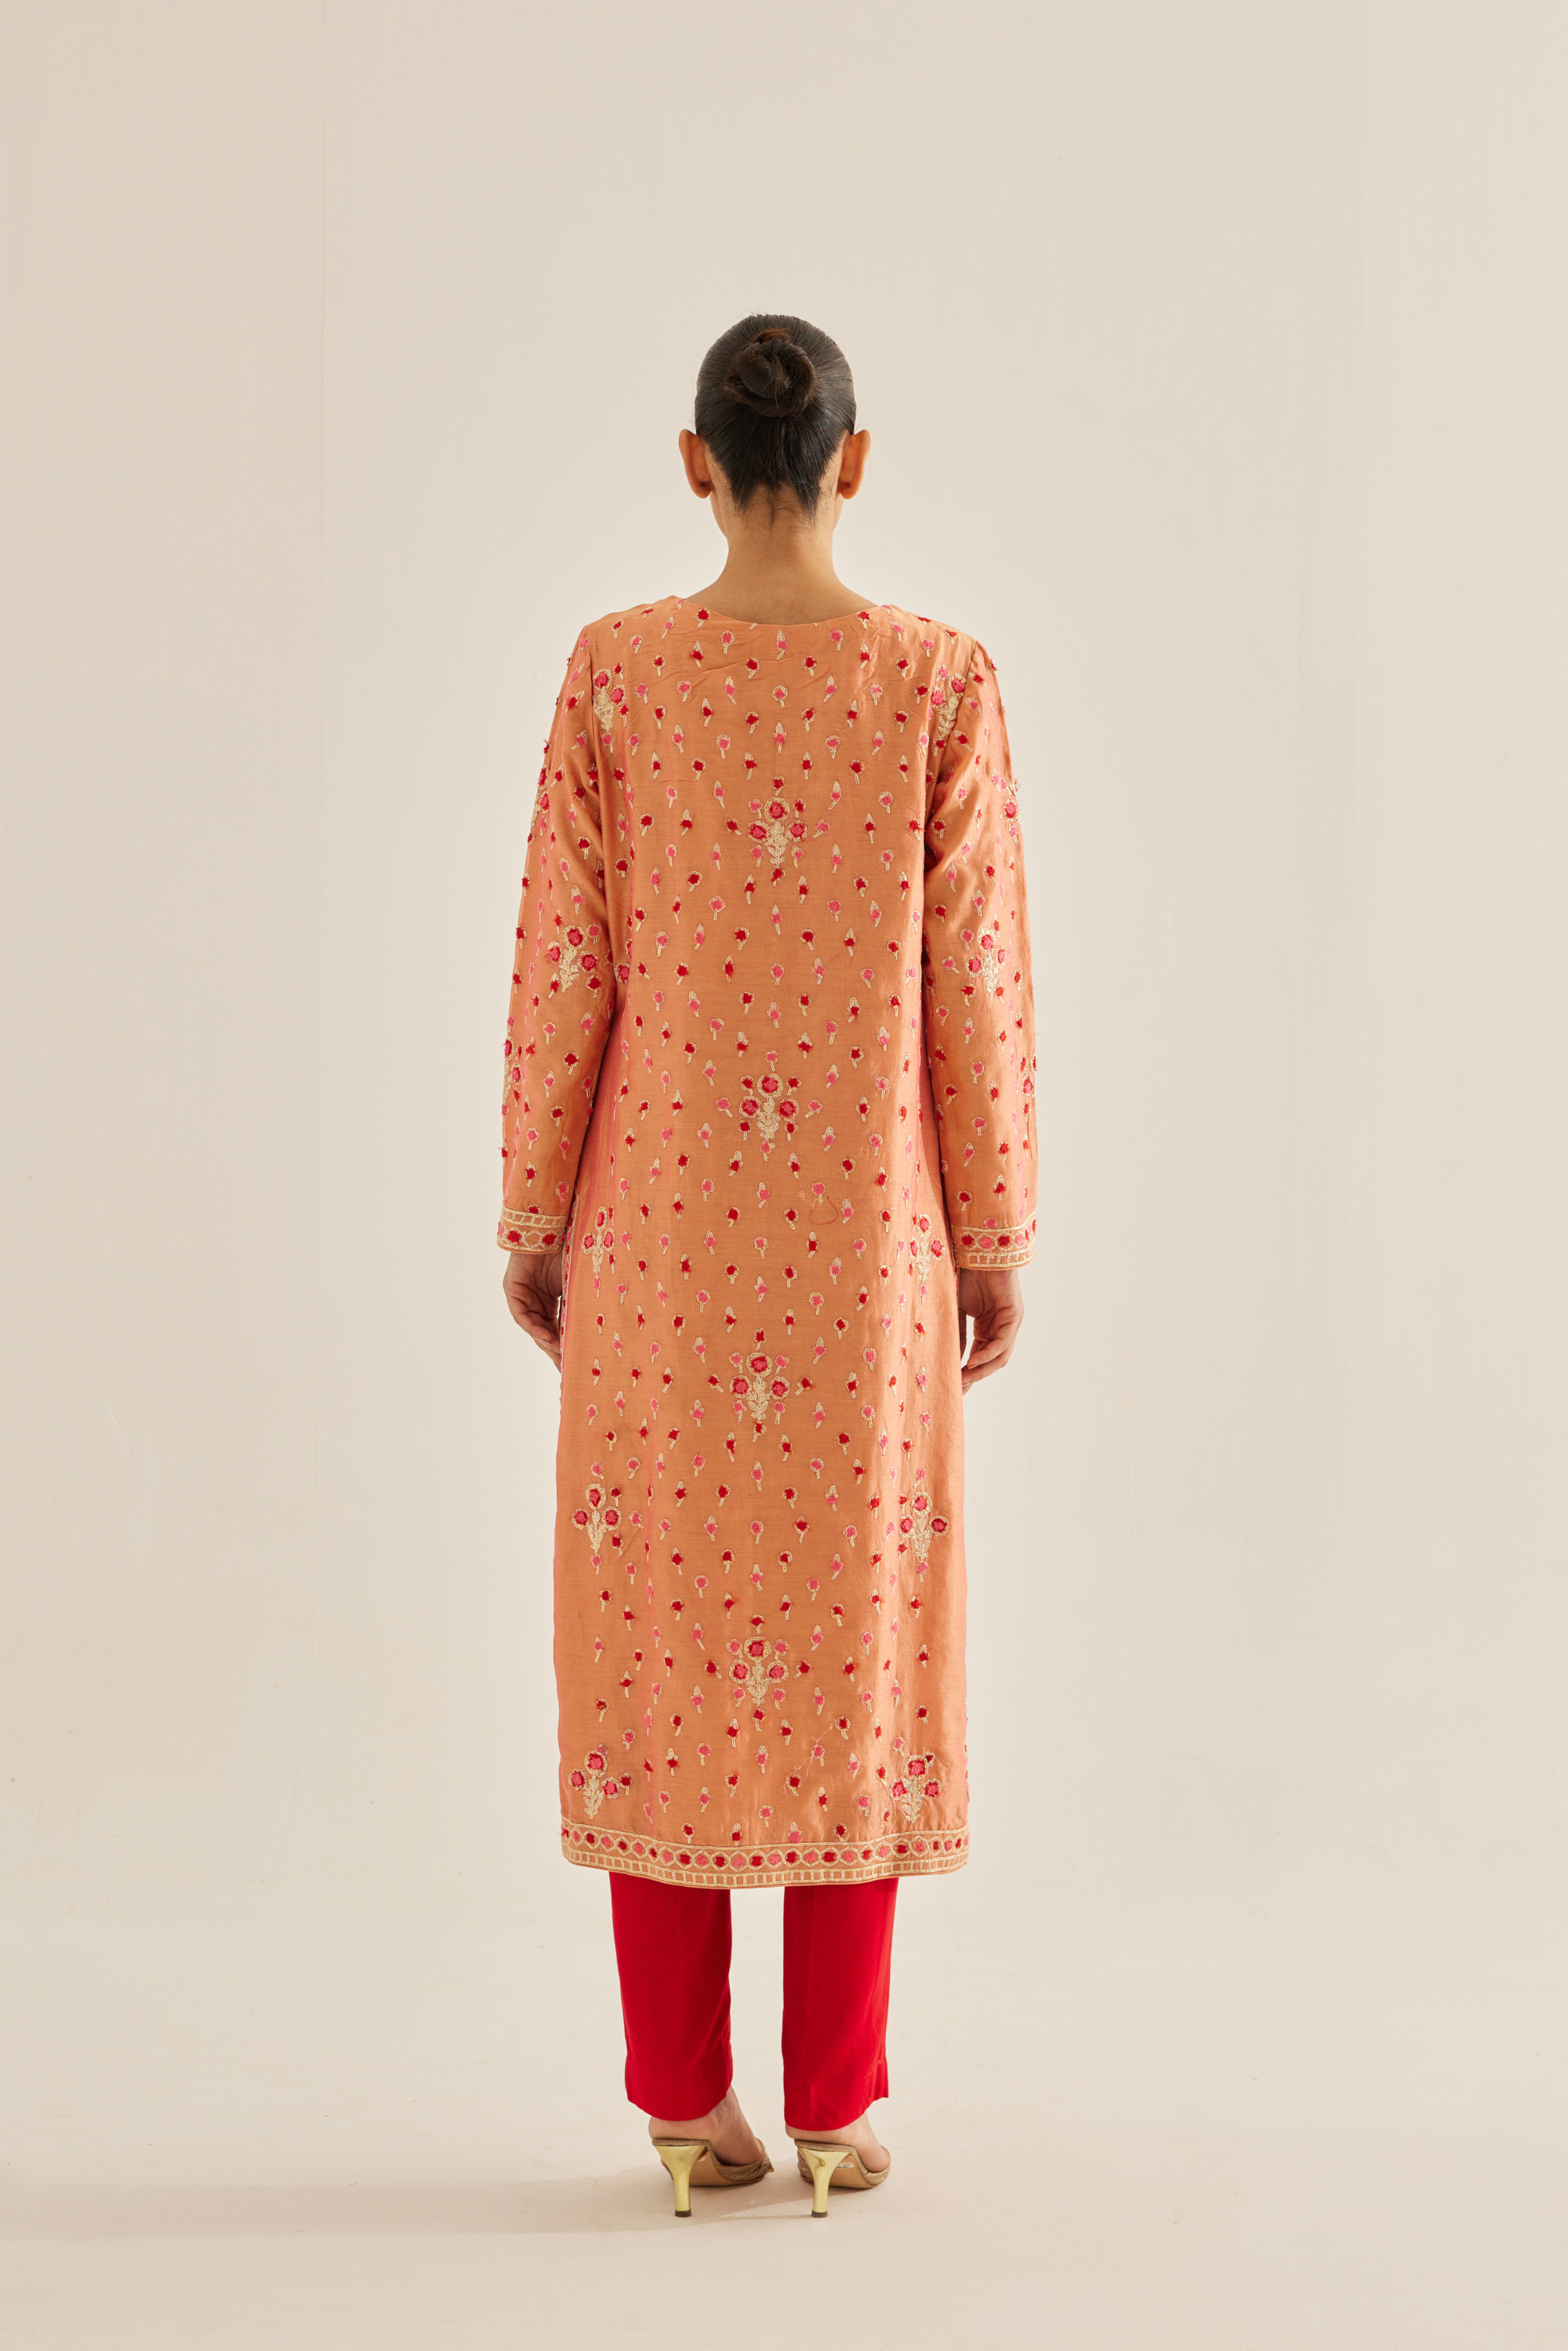 Gota And Thread Embroidered Silk Chanderi Kurta And Dupatta With Trousers.